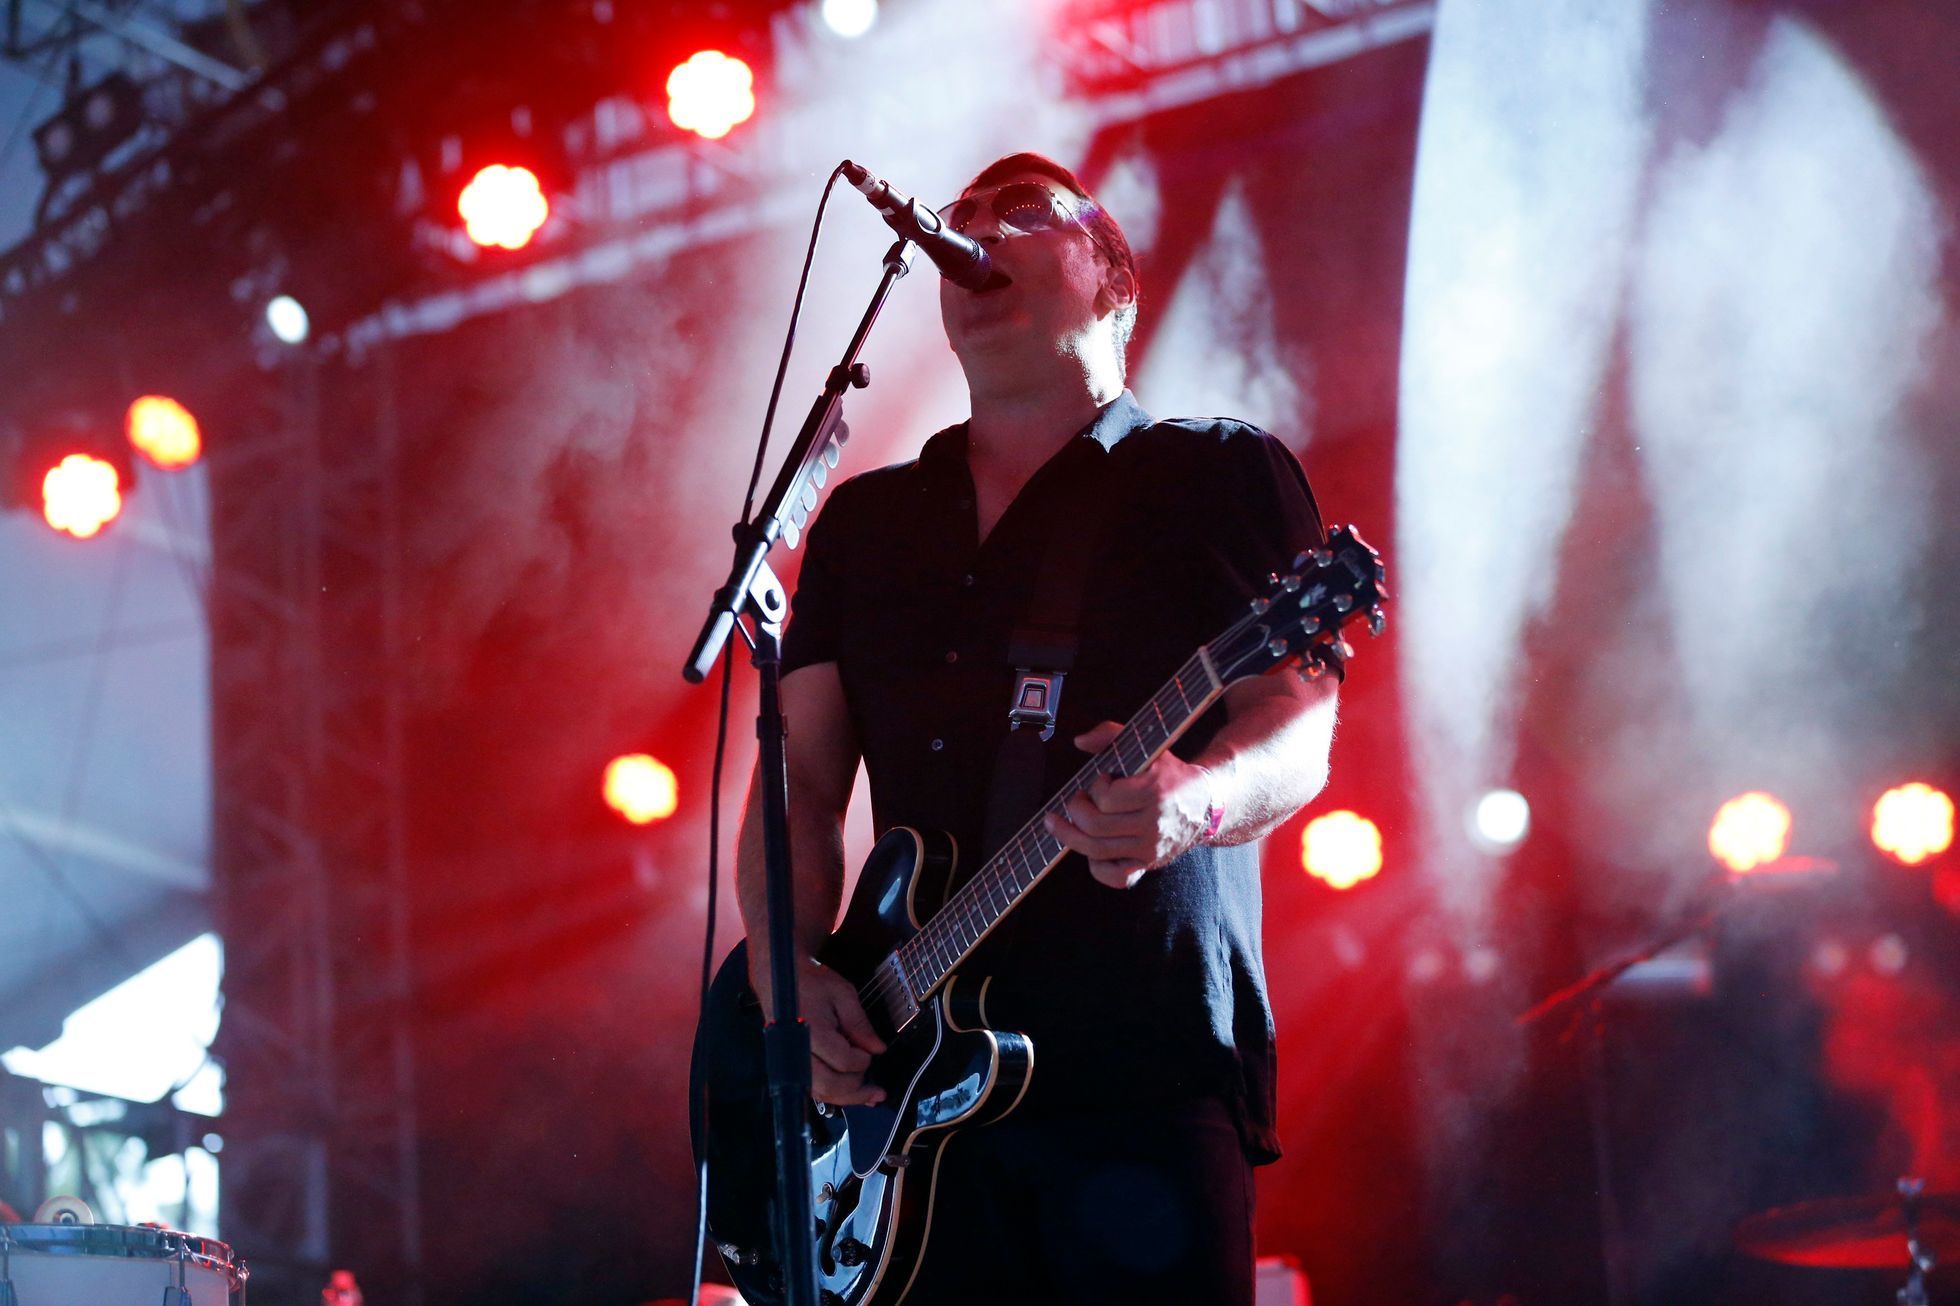 Greg Dulli of The Afghan Whigs performs at the Coachella Valley Music and Arts Festival in Indio, California